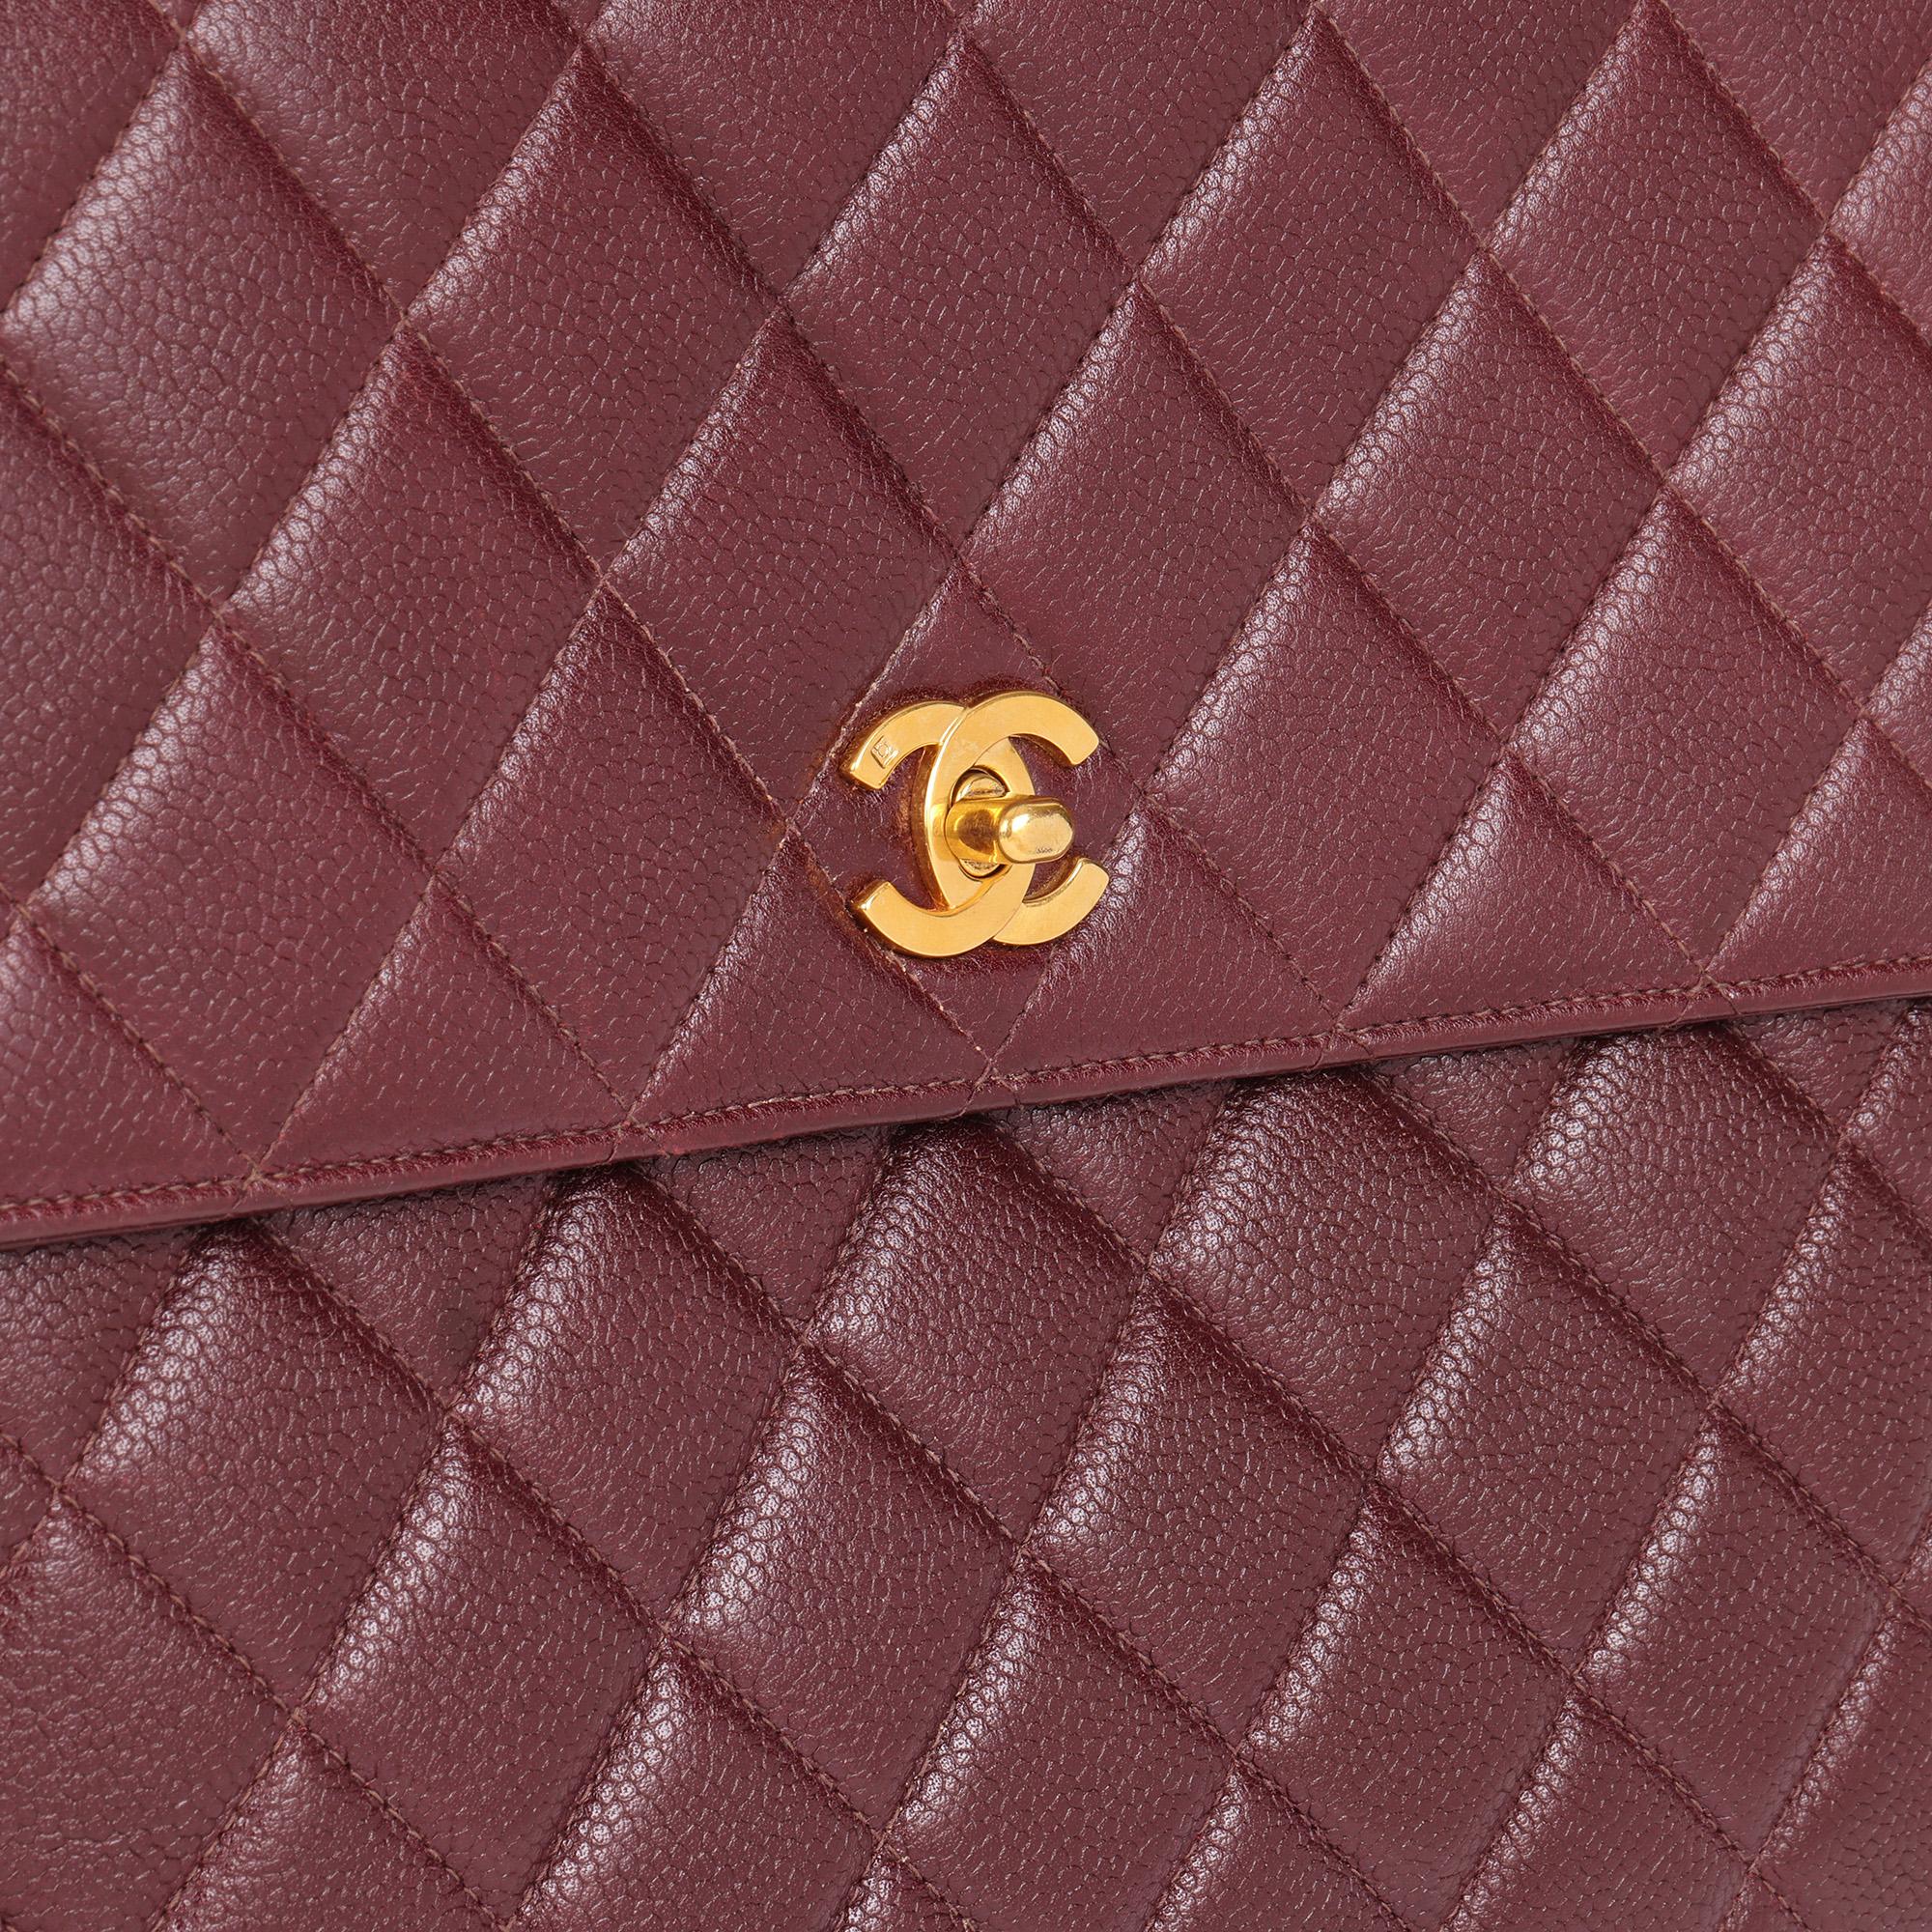 CHANEL Bordeaux Quilted Caviar Leather Vintage Classic Kelly  In Excellent Condition For Sale In Bishop's Stortford, Hertfordshire